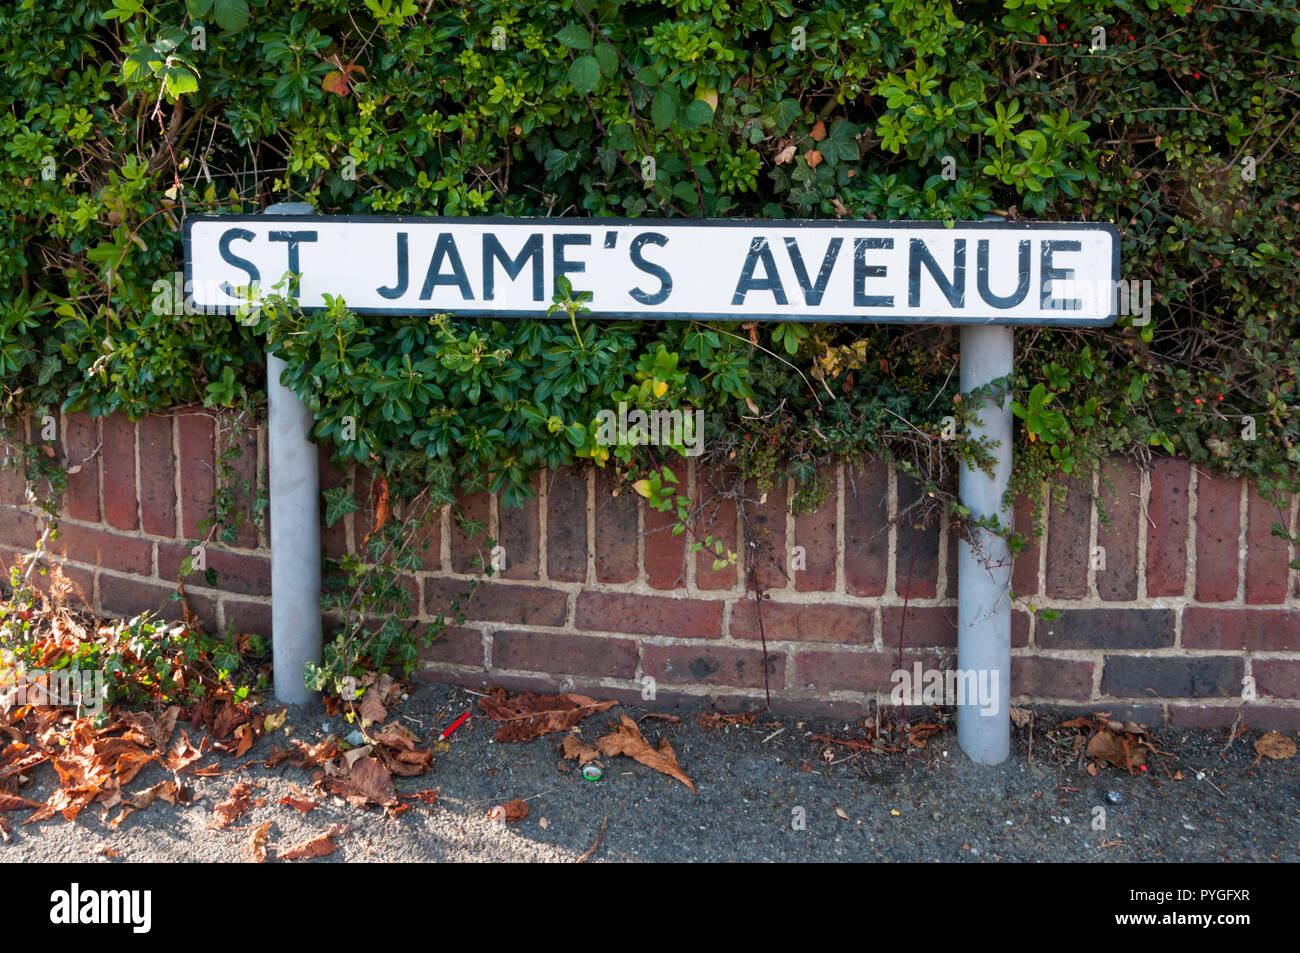 Street name sign reads St Jame's Avenue, with an incorrectly placed apostrophe. Stock Photo